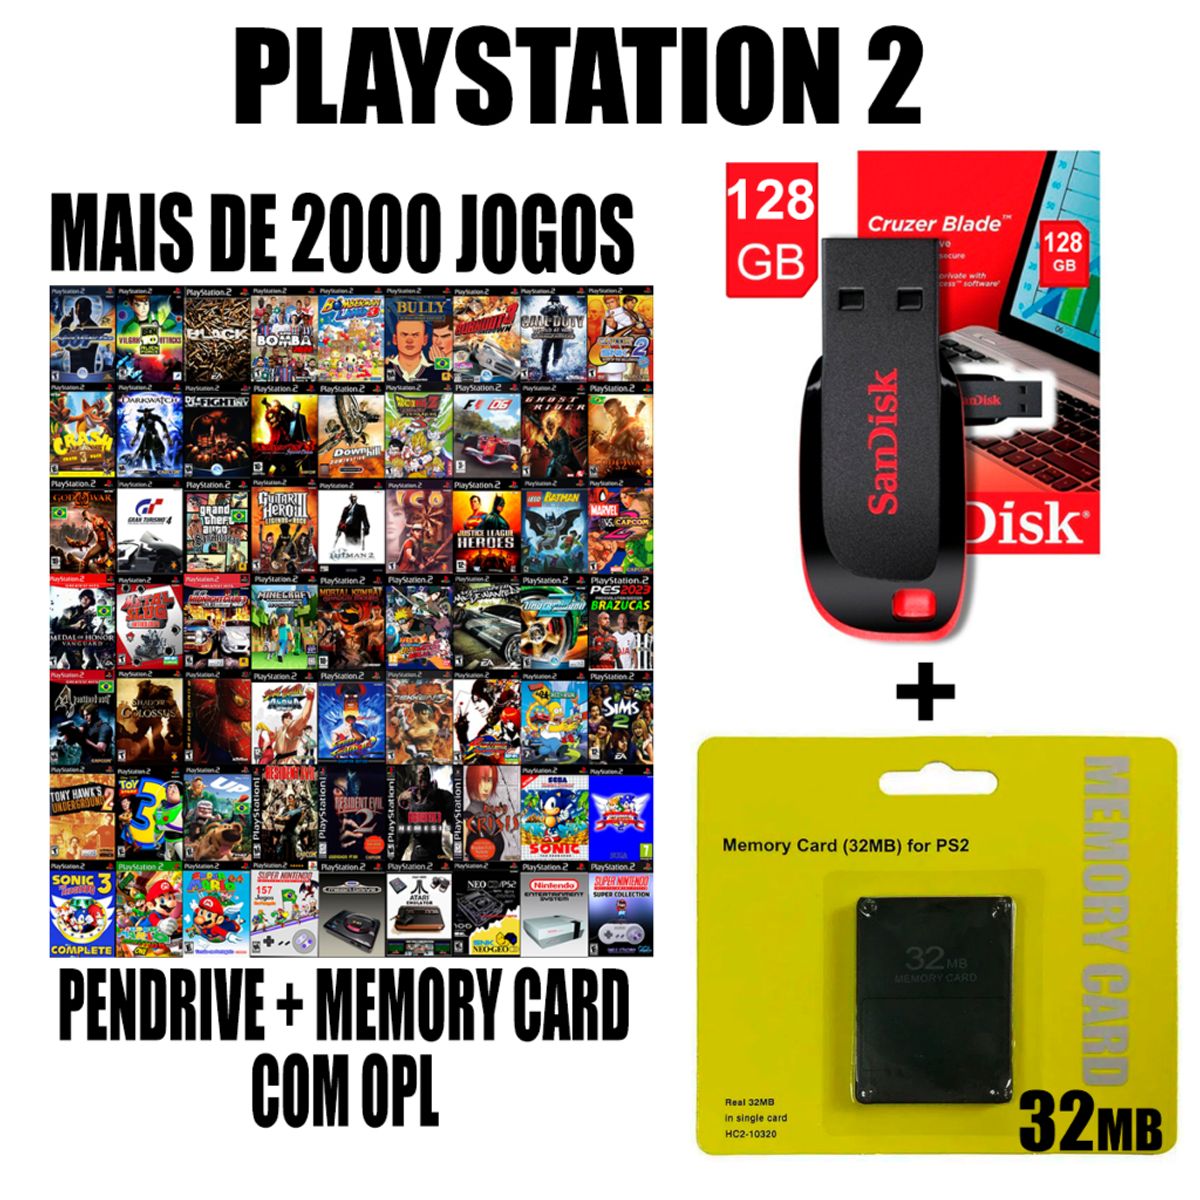 1) PSX Downloads • opl pack games pendrive 4gb : Playstation 2 - PS2